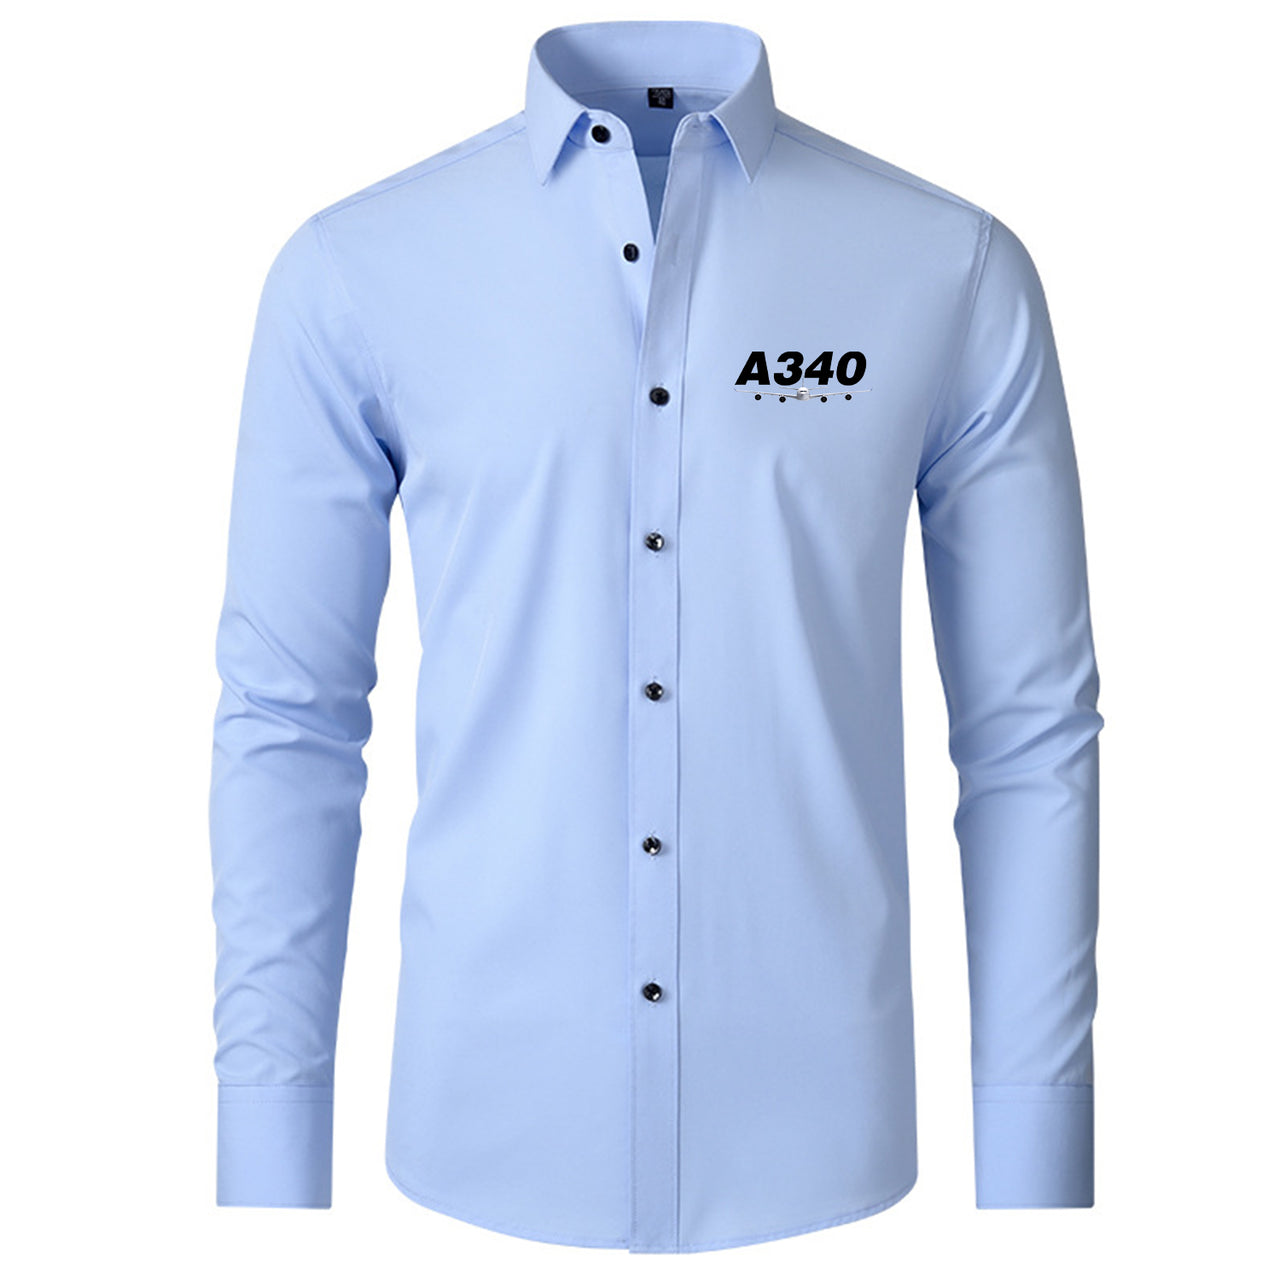 Super Airbus A340 Designed Long Sleeve Shirts